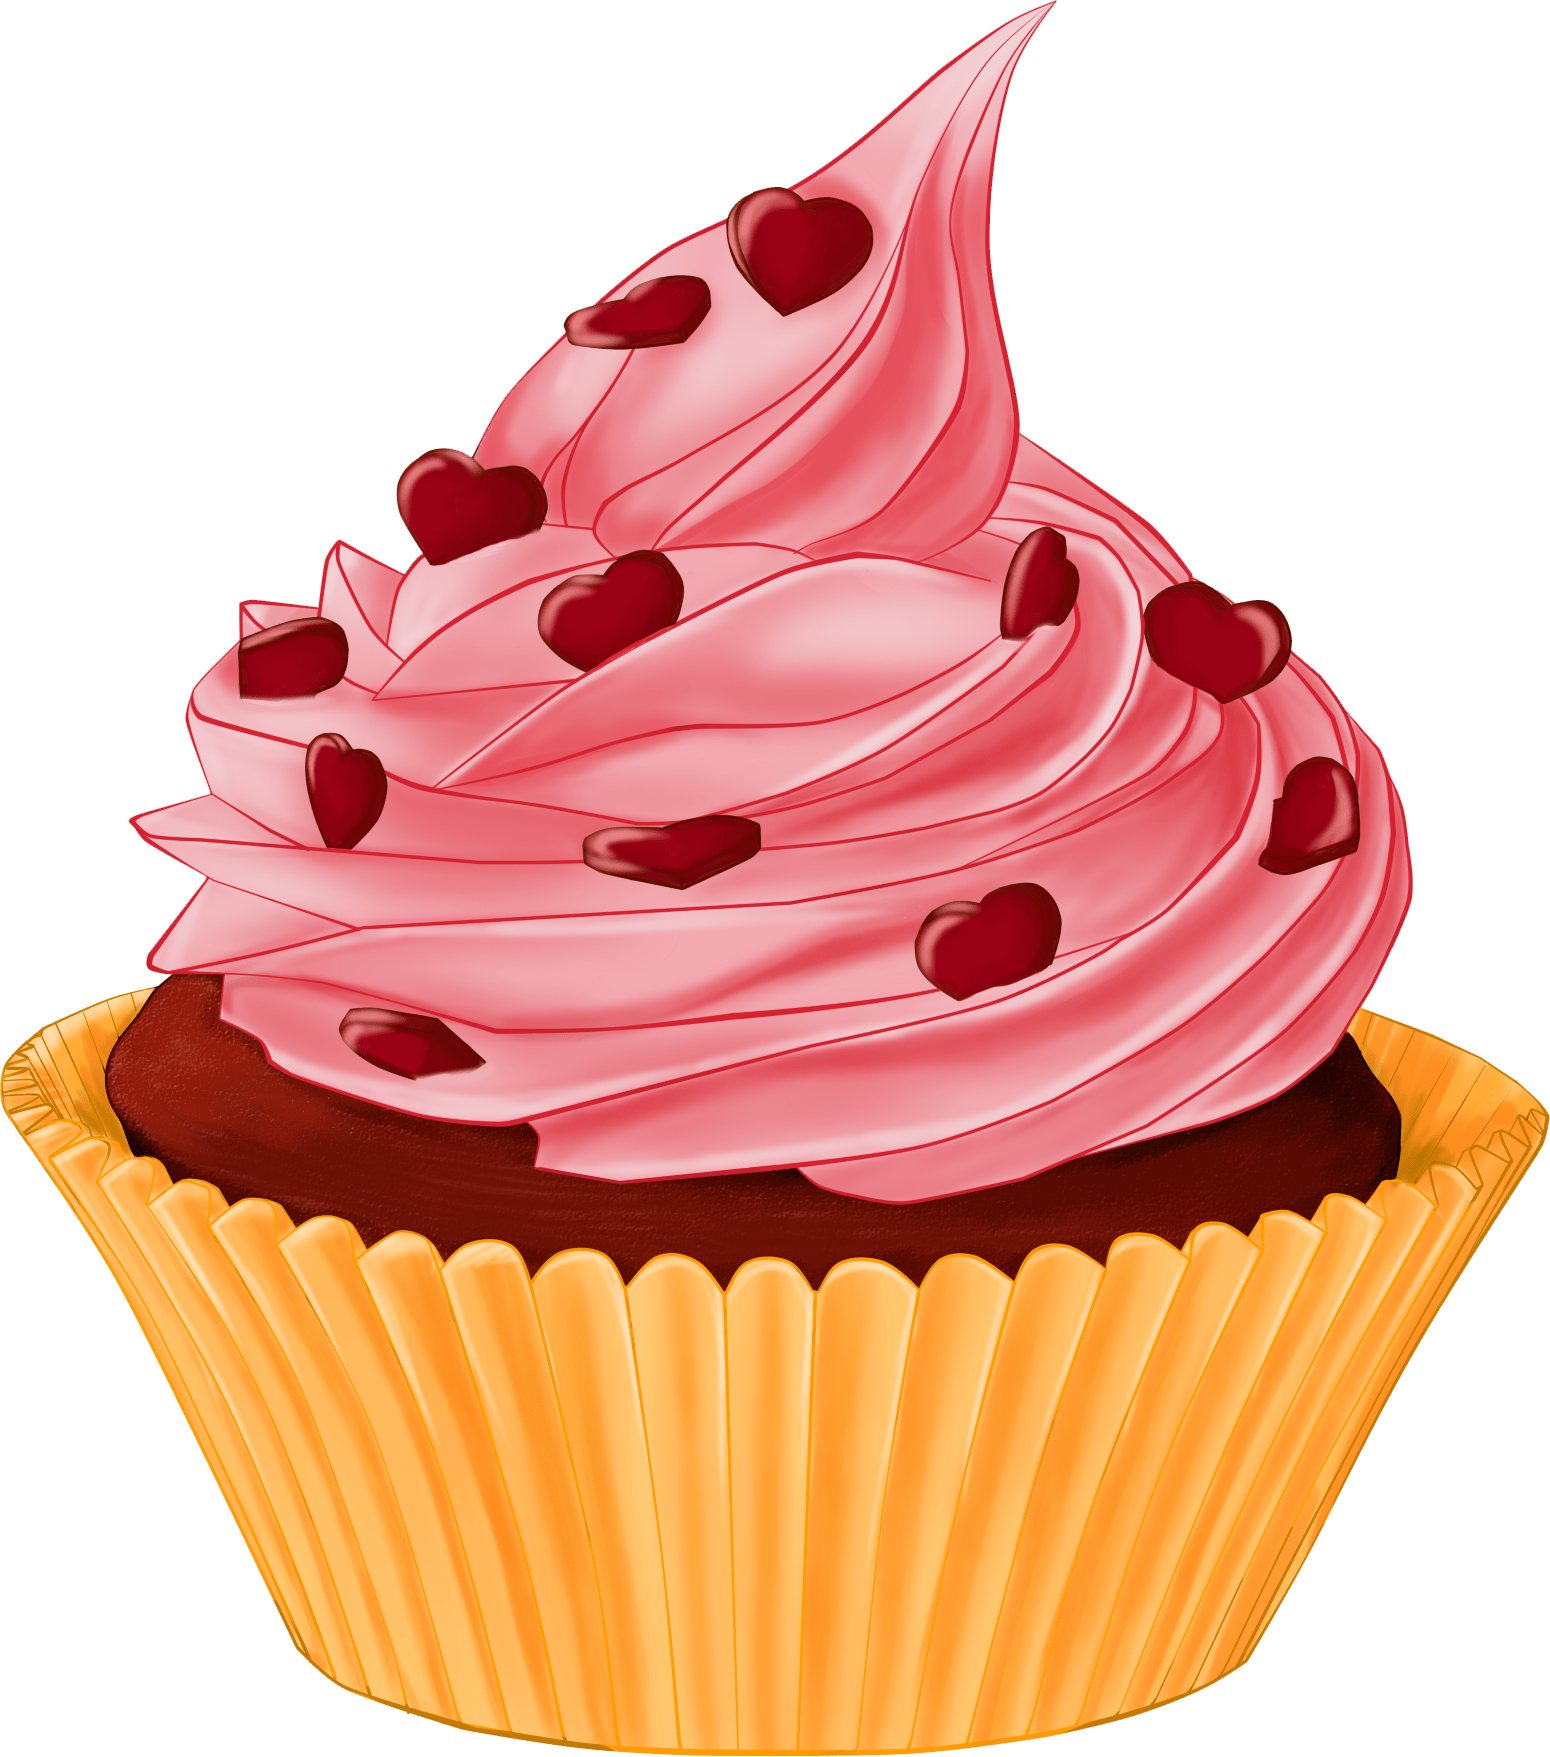 Cupcakes clipart animated. Cake transparent png images